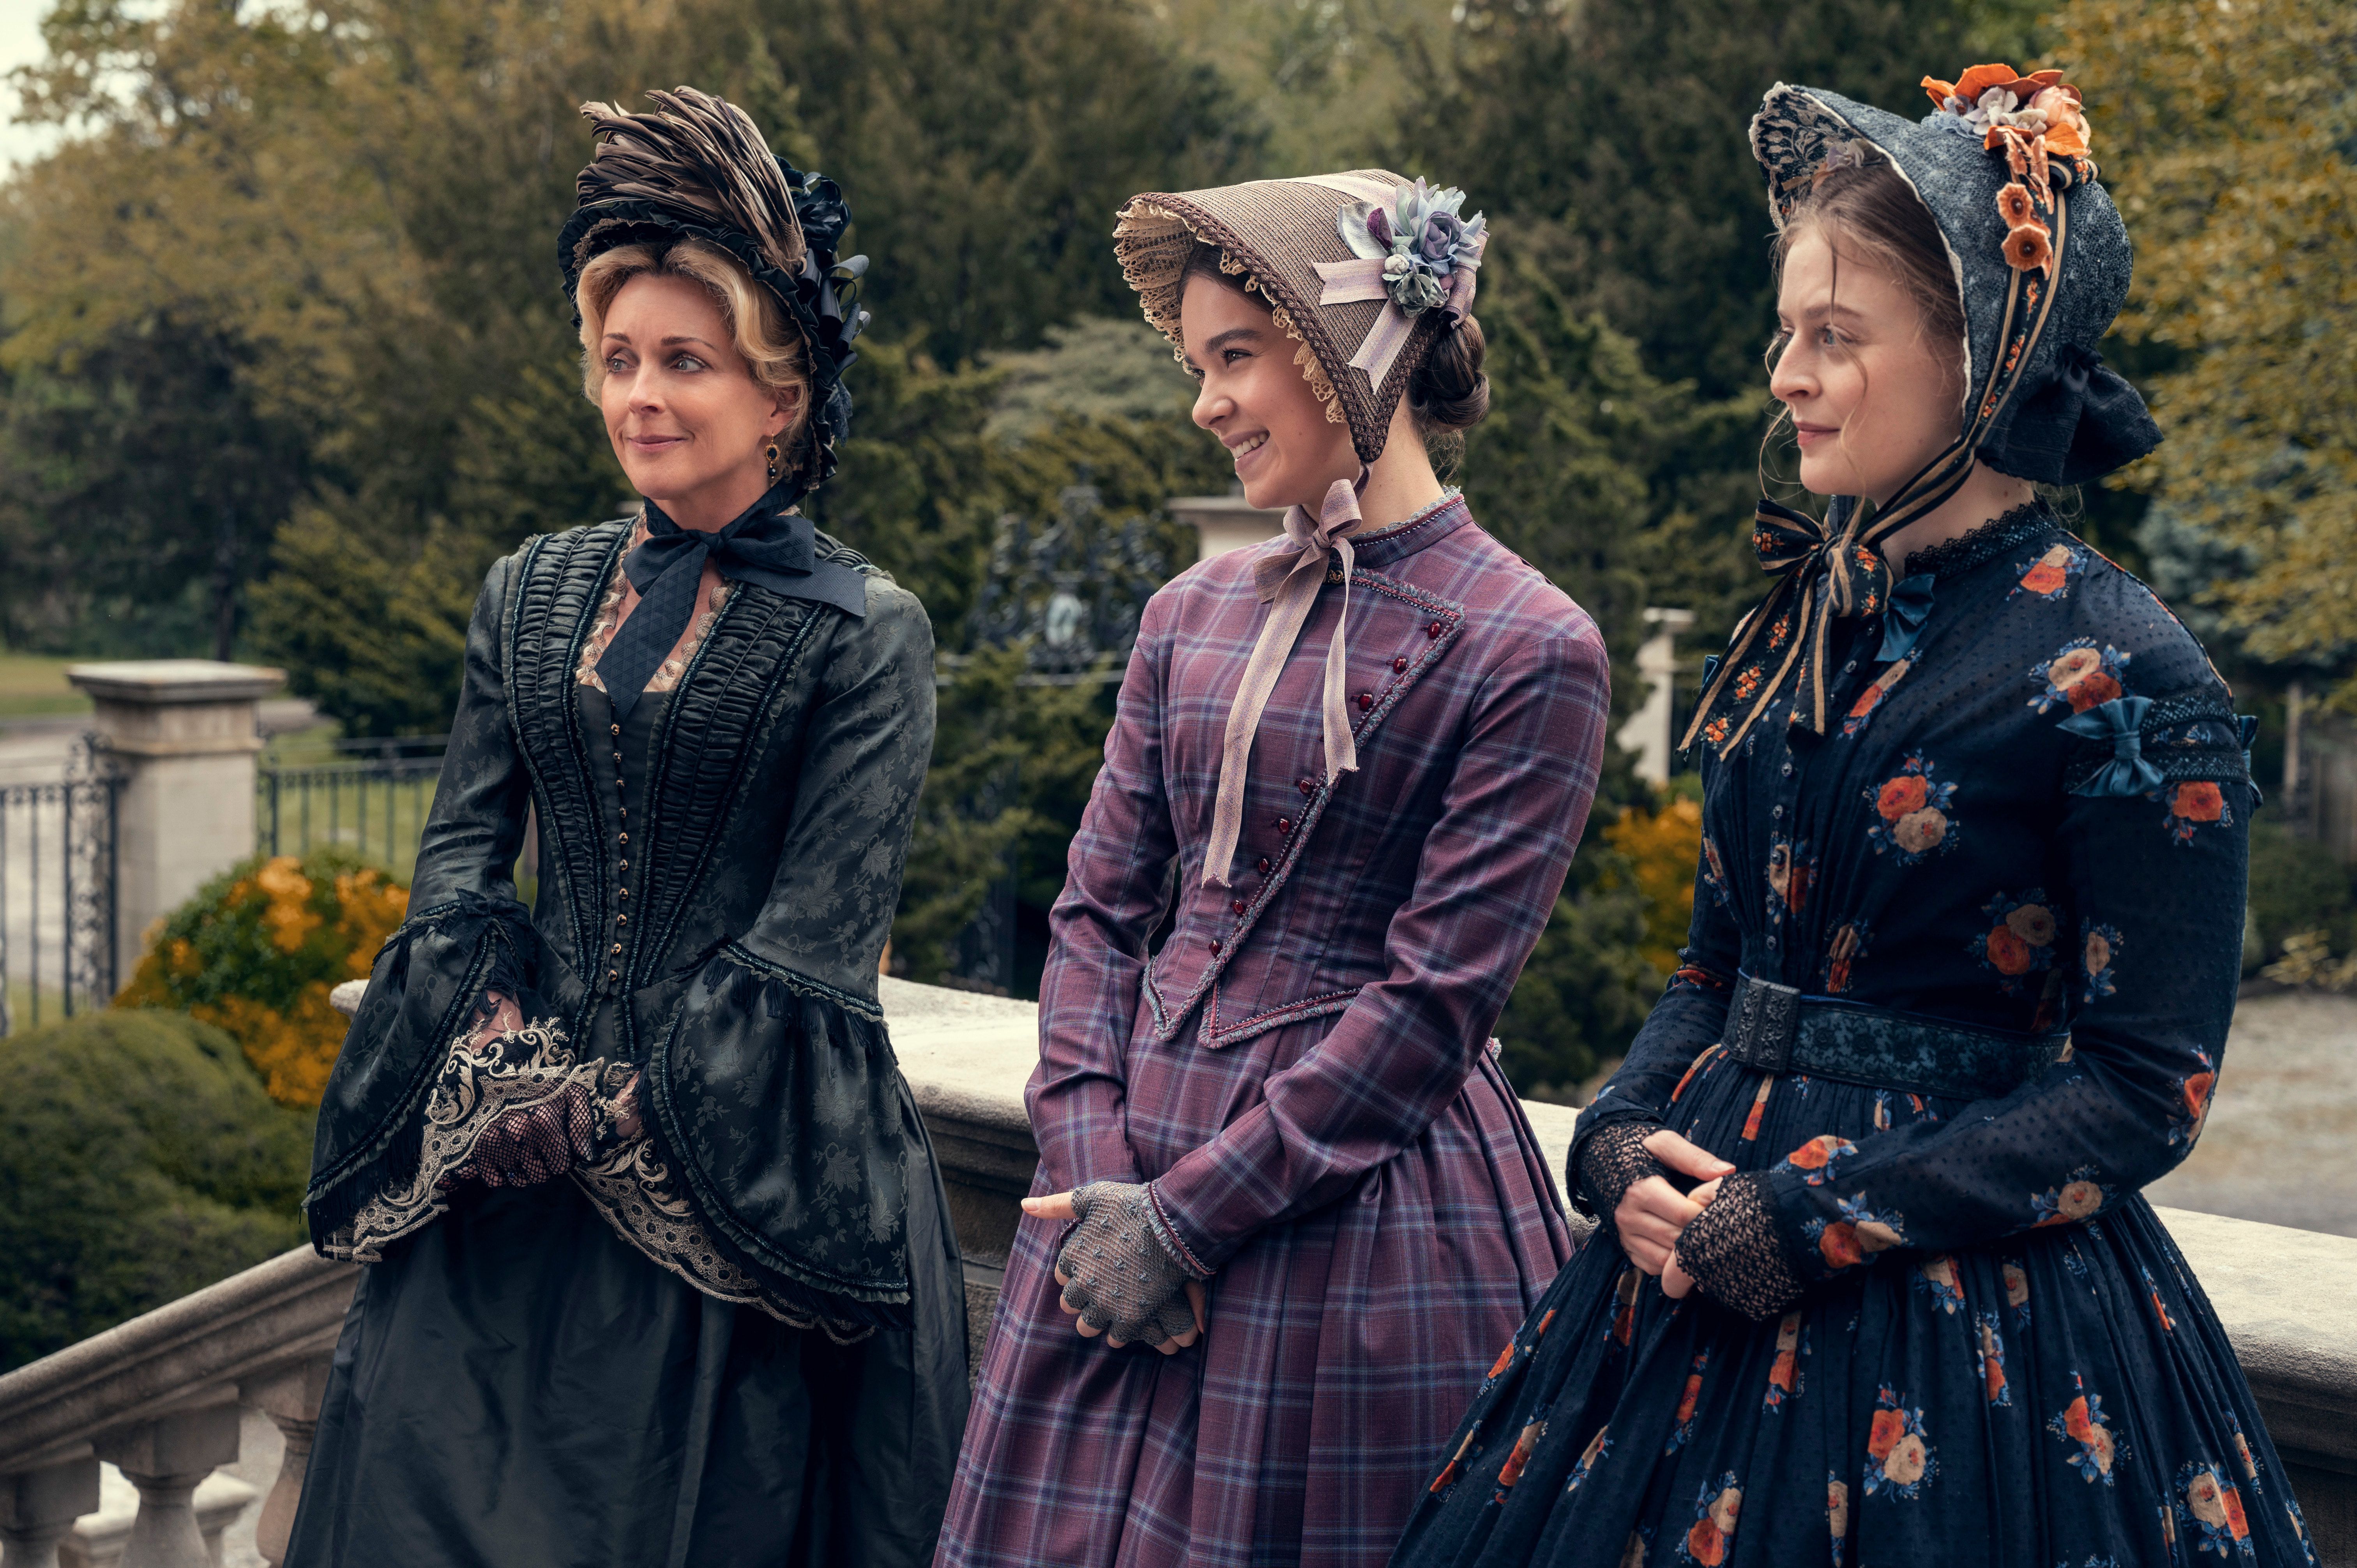 Historical Fashion Accuracy in Film: Little Women 2019 – The